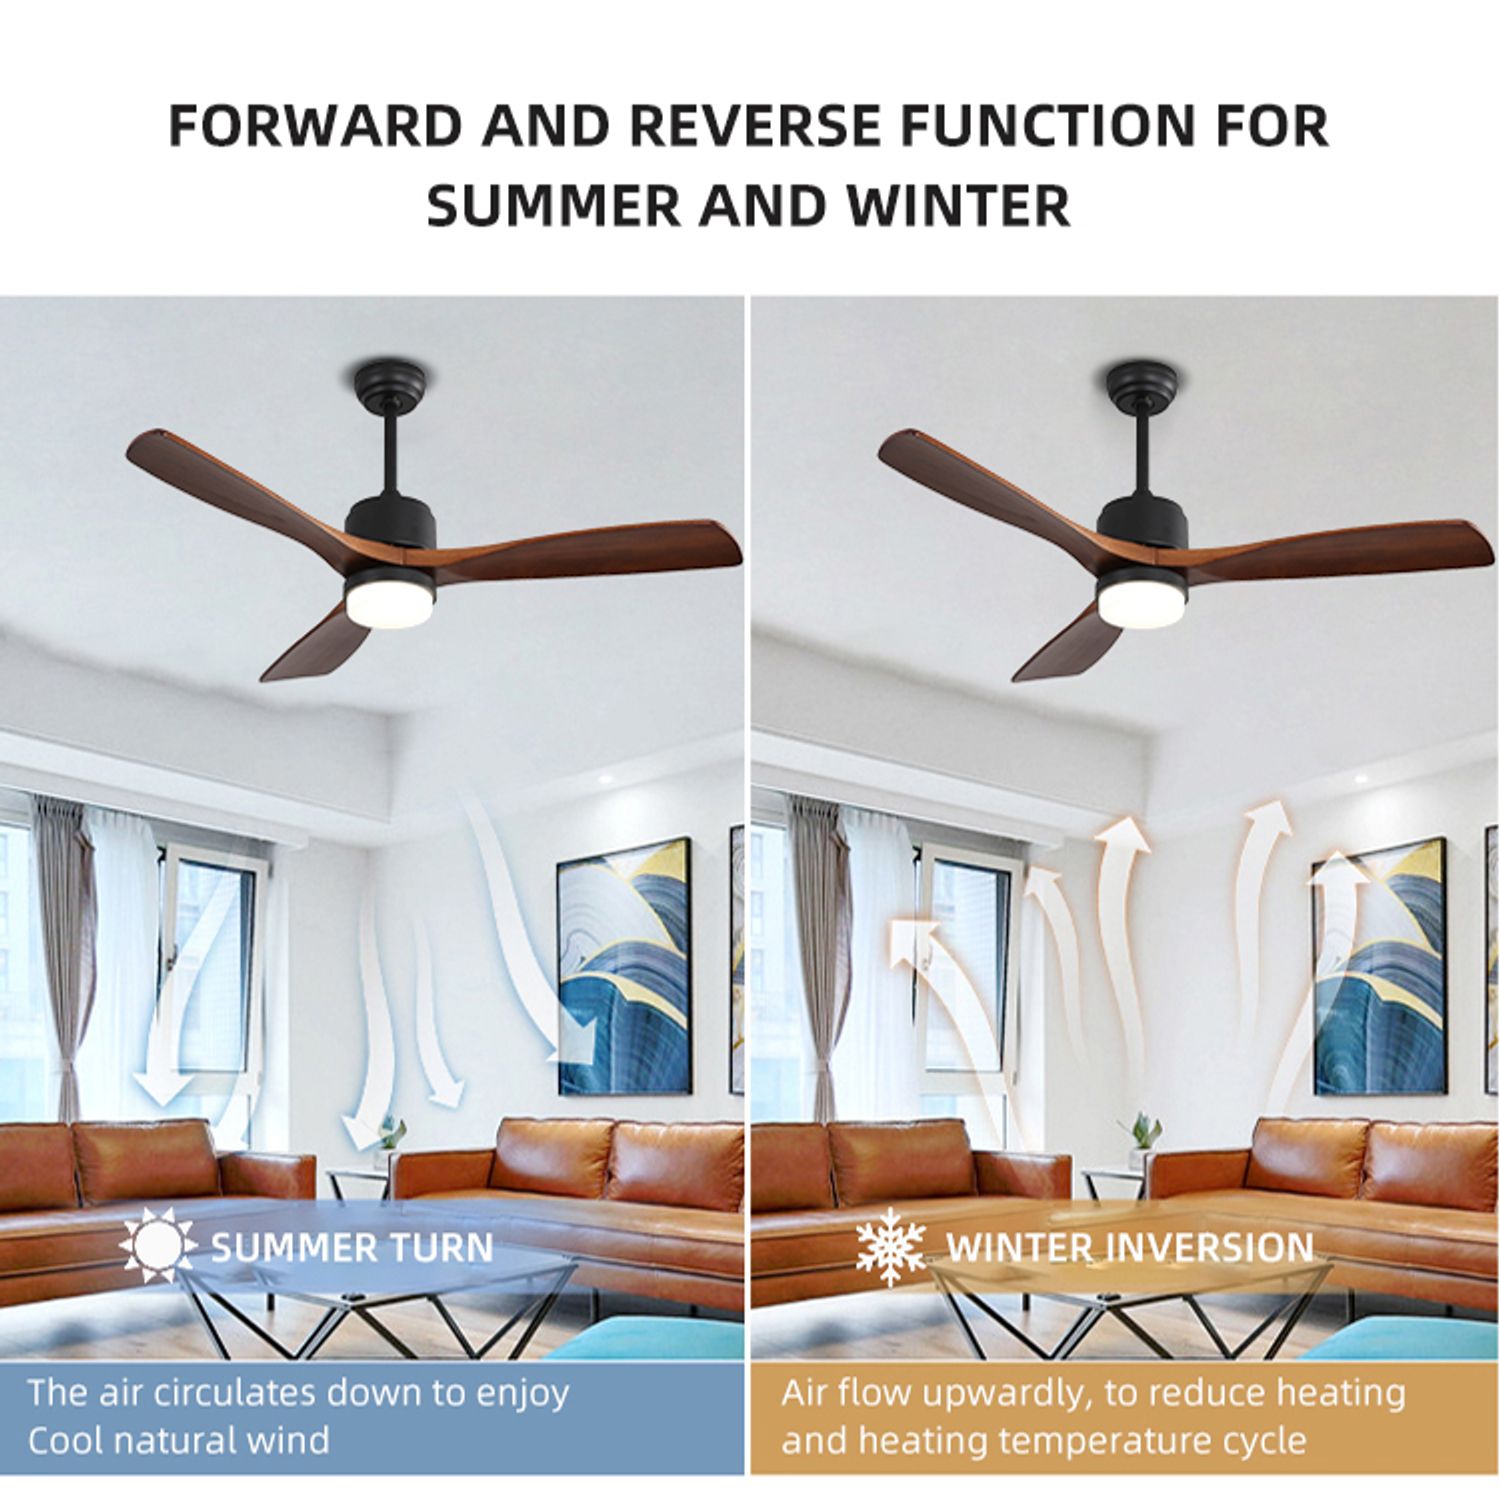 Forward and reverse function of KBS wood propeller quiet ceiling fans with lights and remote control